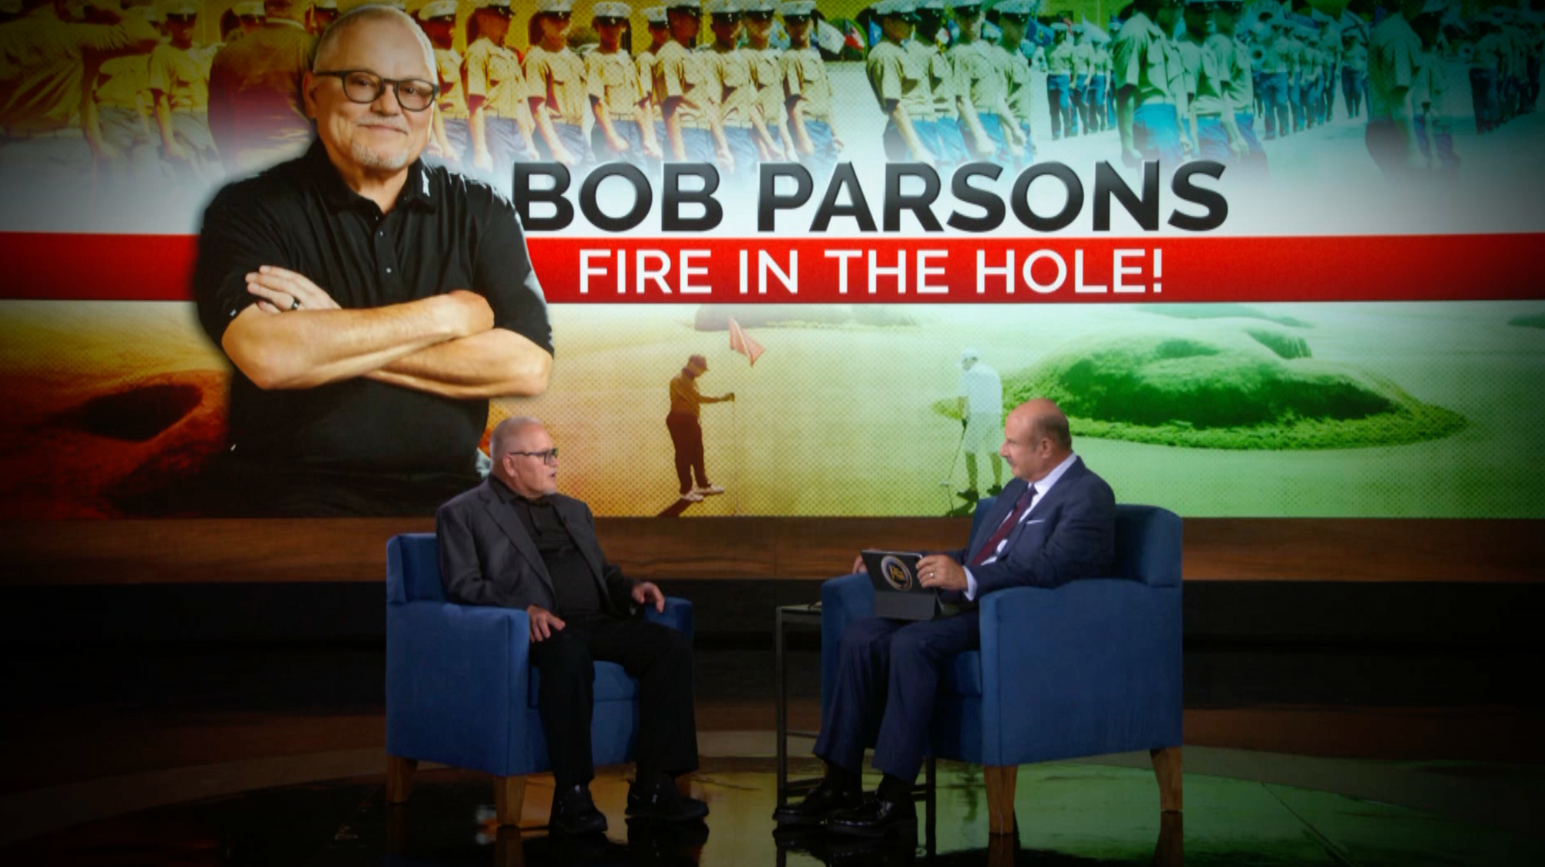 Bob Parsons Fire in the Hole!